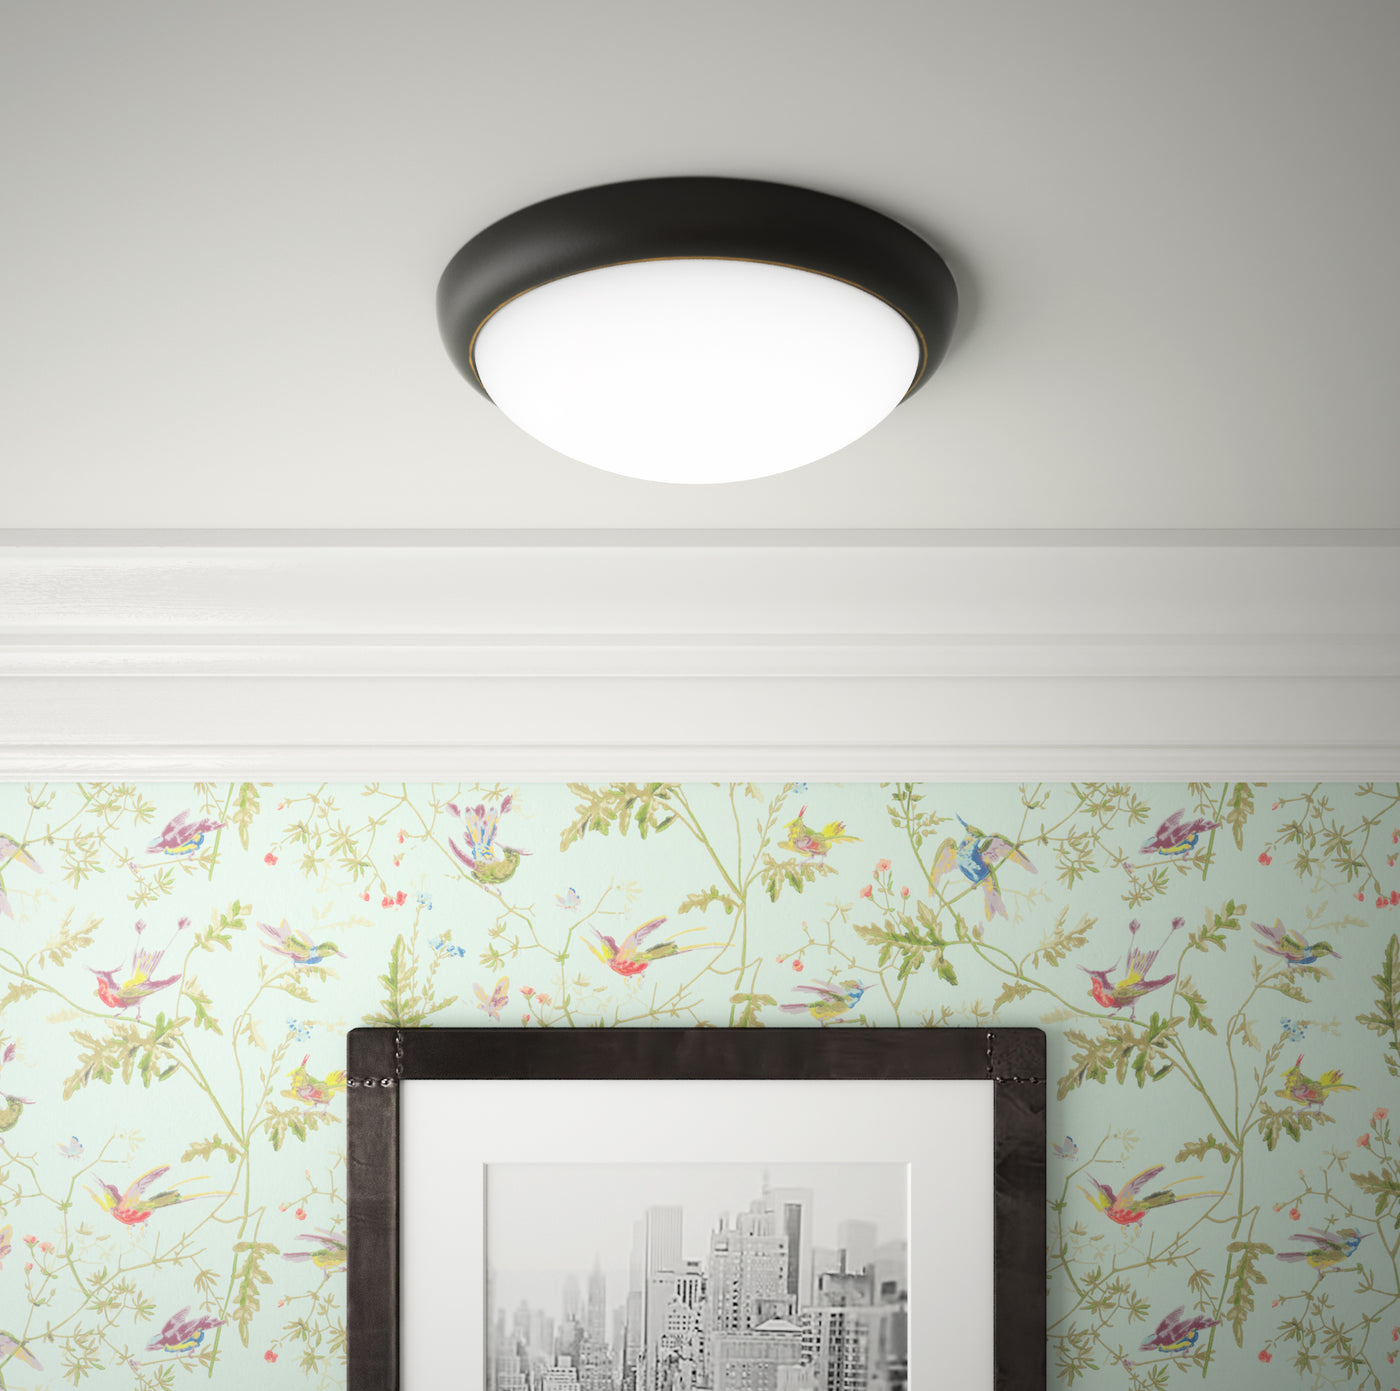 Luminosa 13 Inch Modern Round Flush Mount LED Light with Oil Rubbed Bronze Finish